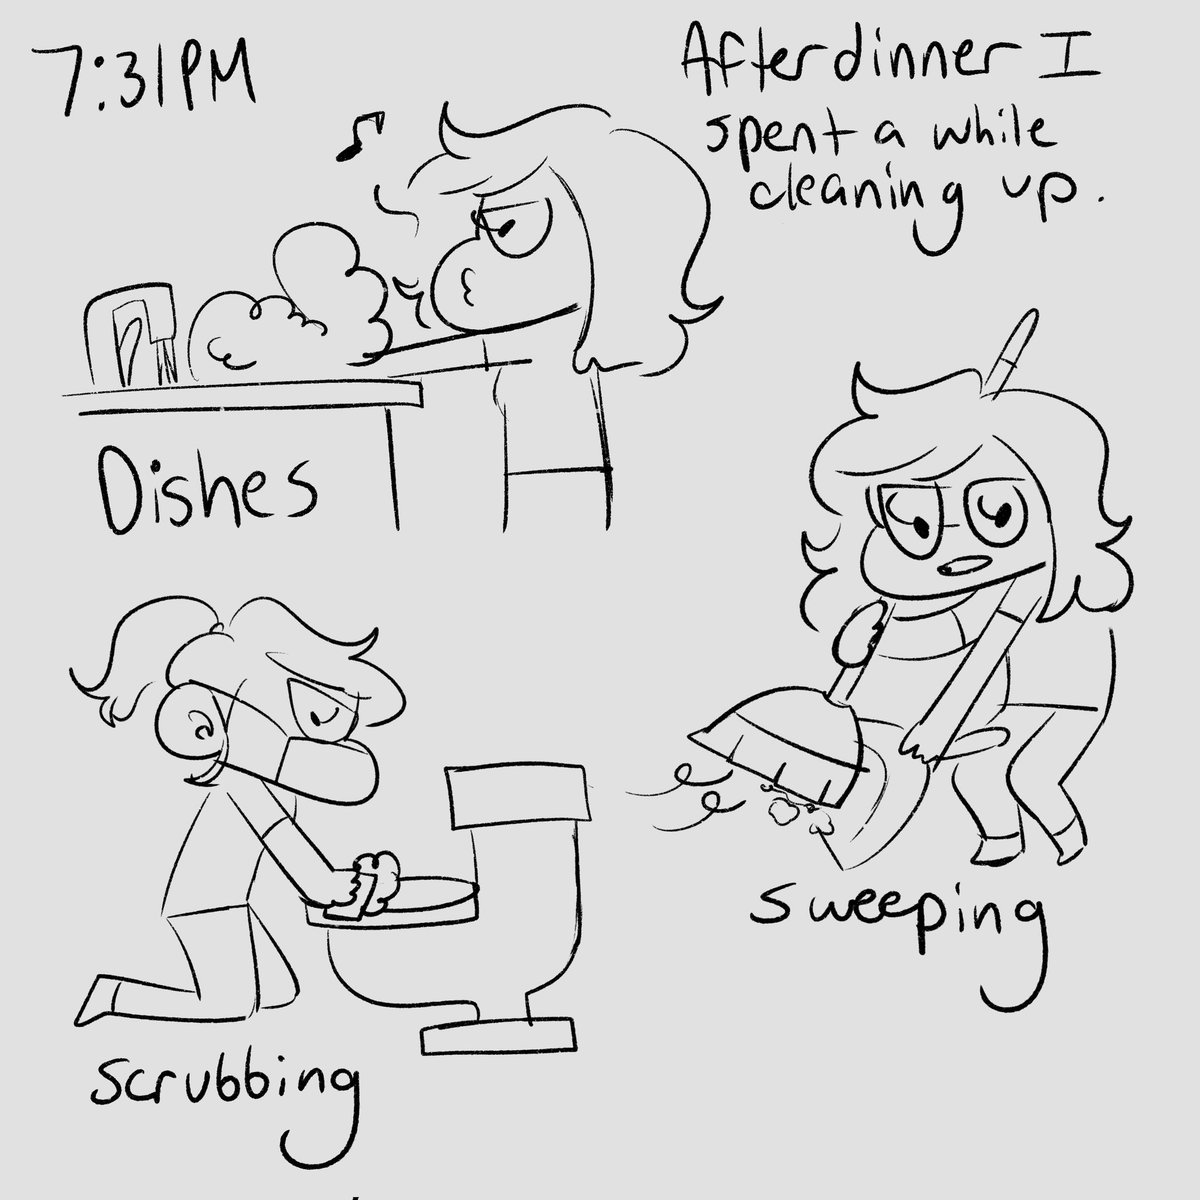 I've been wanting to clean all day so this was a good hour #hourlycomicday2022 